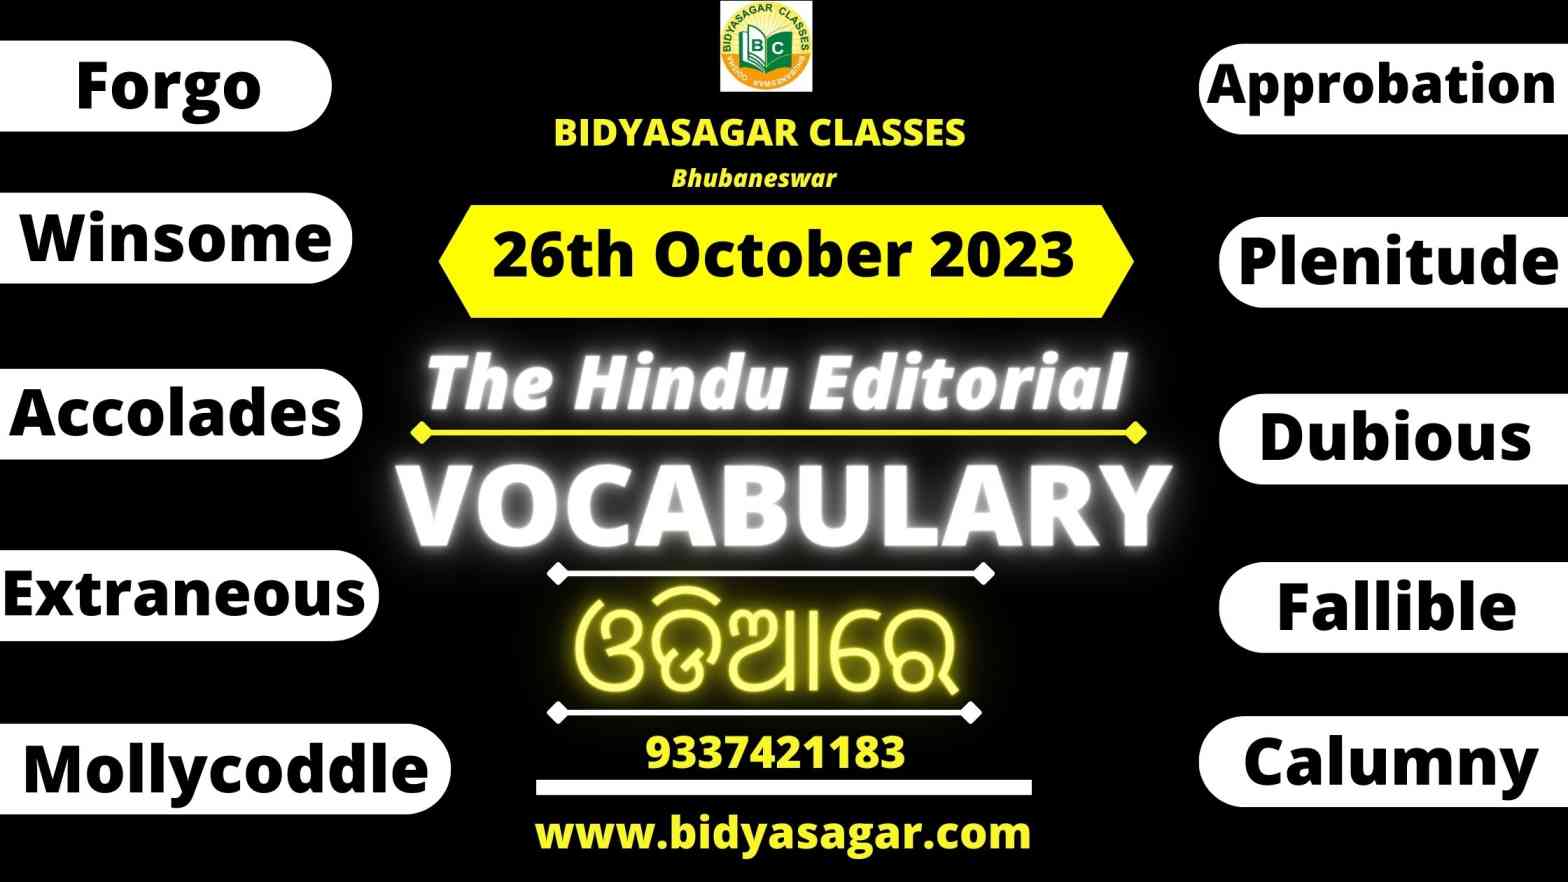 The Hindu Editorial Vocabulary of 26th October 2023